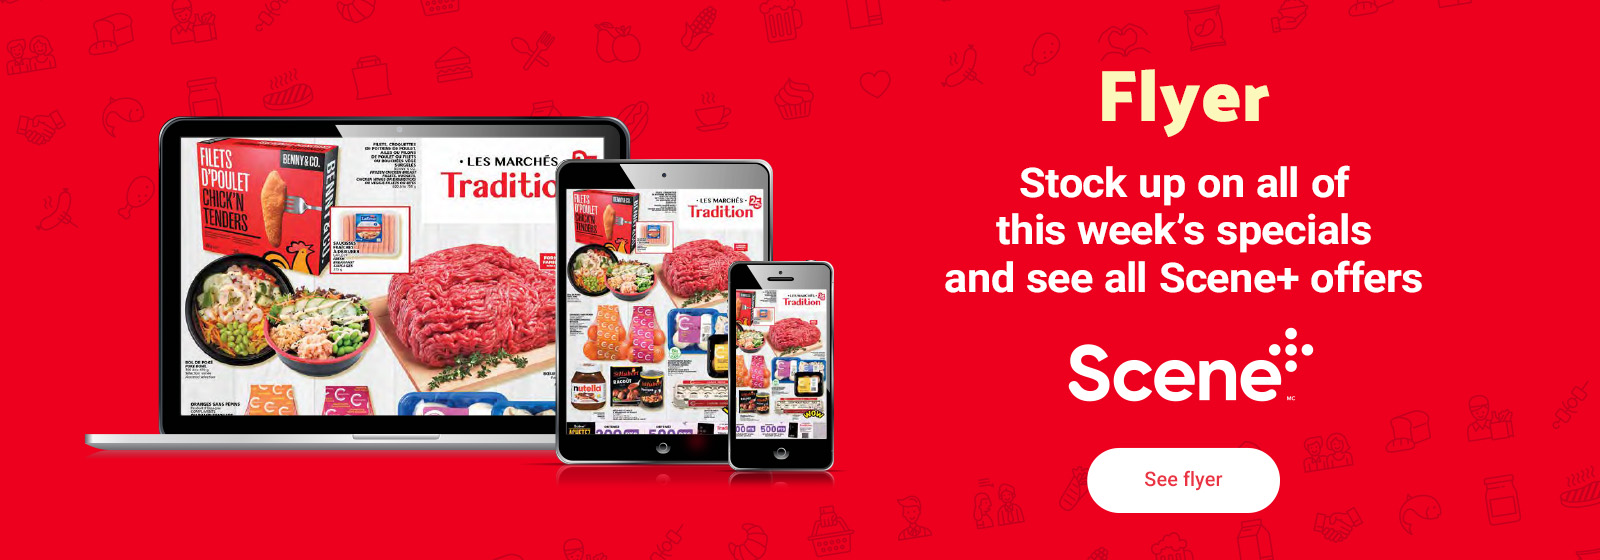 A digital flyer for Scene+ offers is displayed on a laptop, tablet, and smartphone screens against a red background. Text reads, "Stock up on all of this week's specials and see all Scene+ offers." A button at the bottom says, "See flyer".